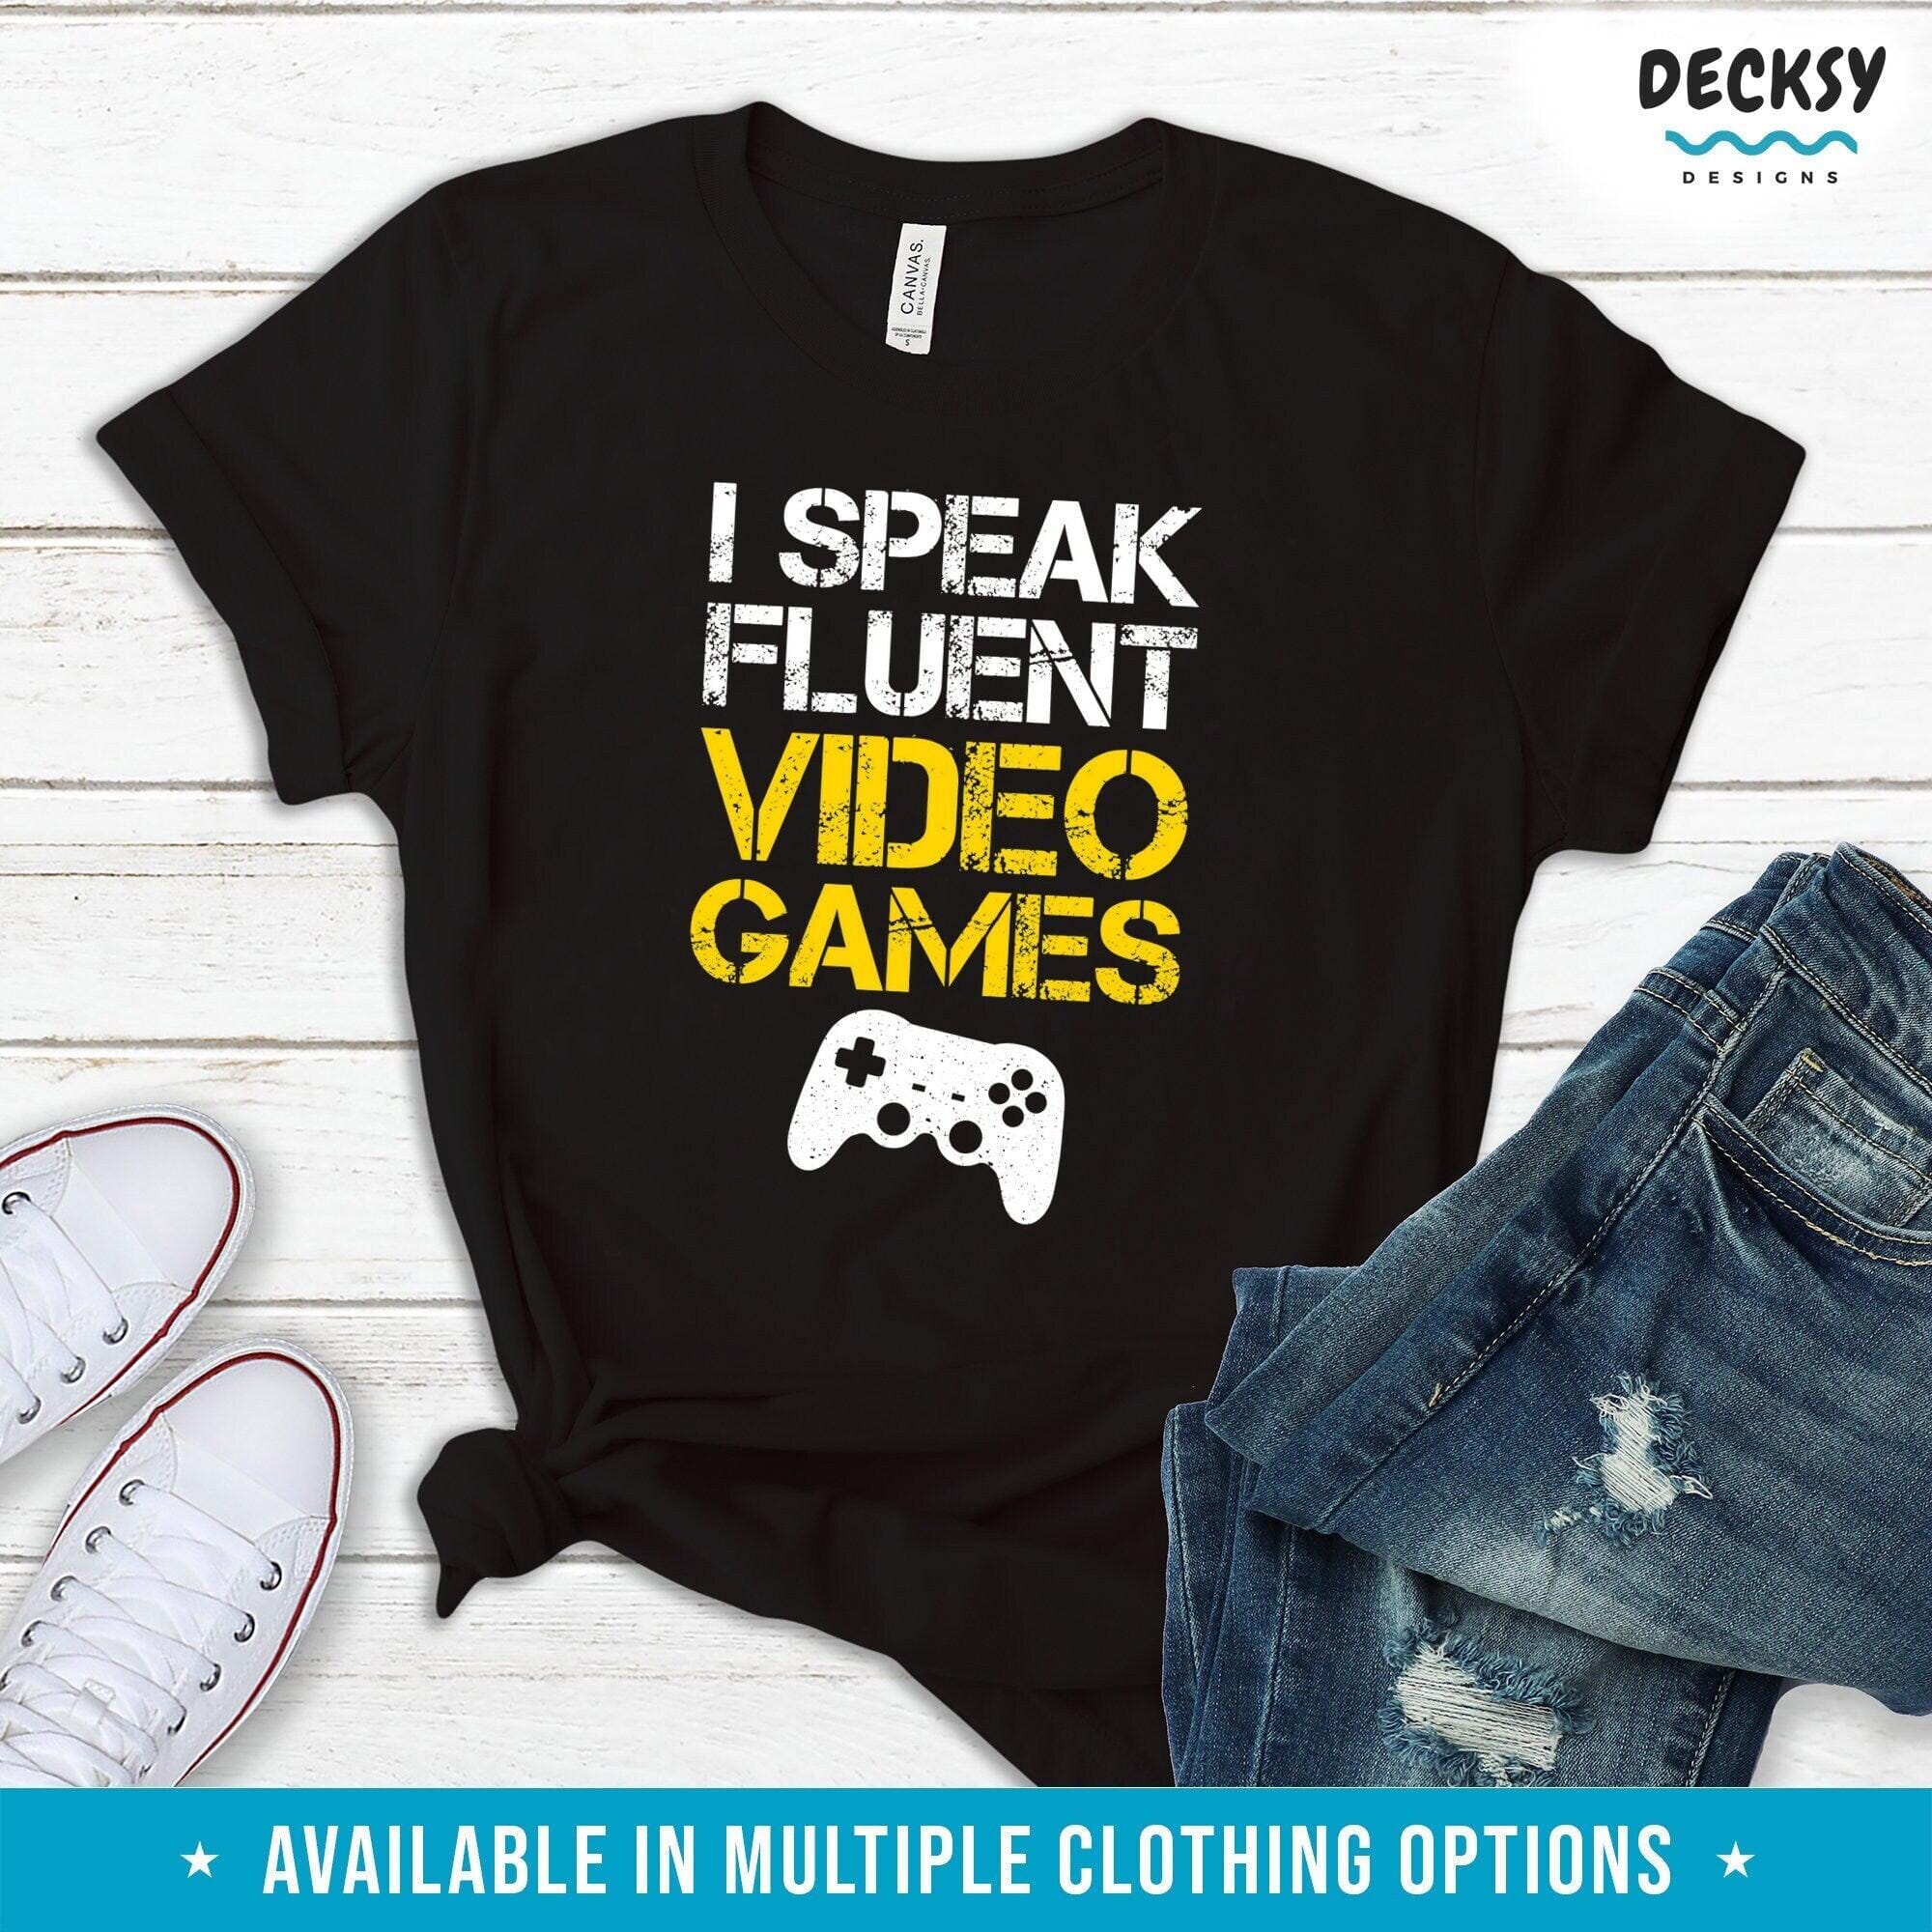 Gaming Shirt, Video Gamer Gift-Clothing:Gender-Neutral Adult Clothing:Tops & Tees:T-shirts:Graphic Tees-DecksyDesigns